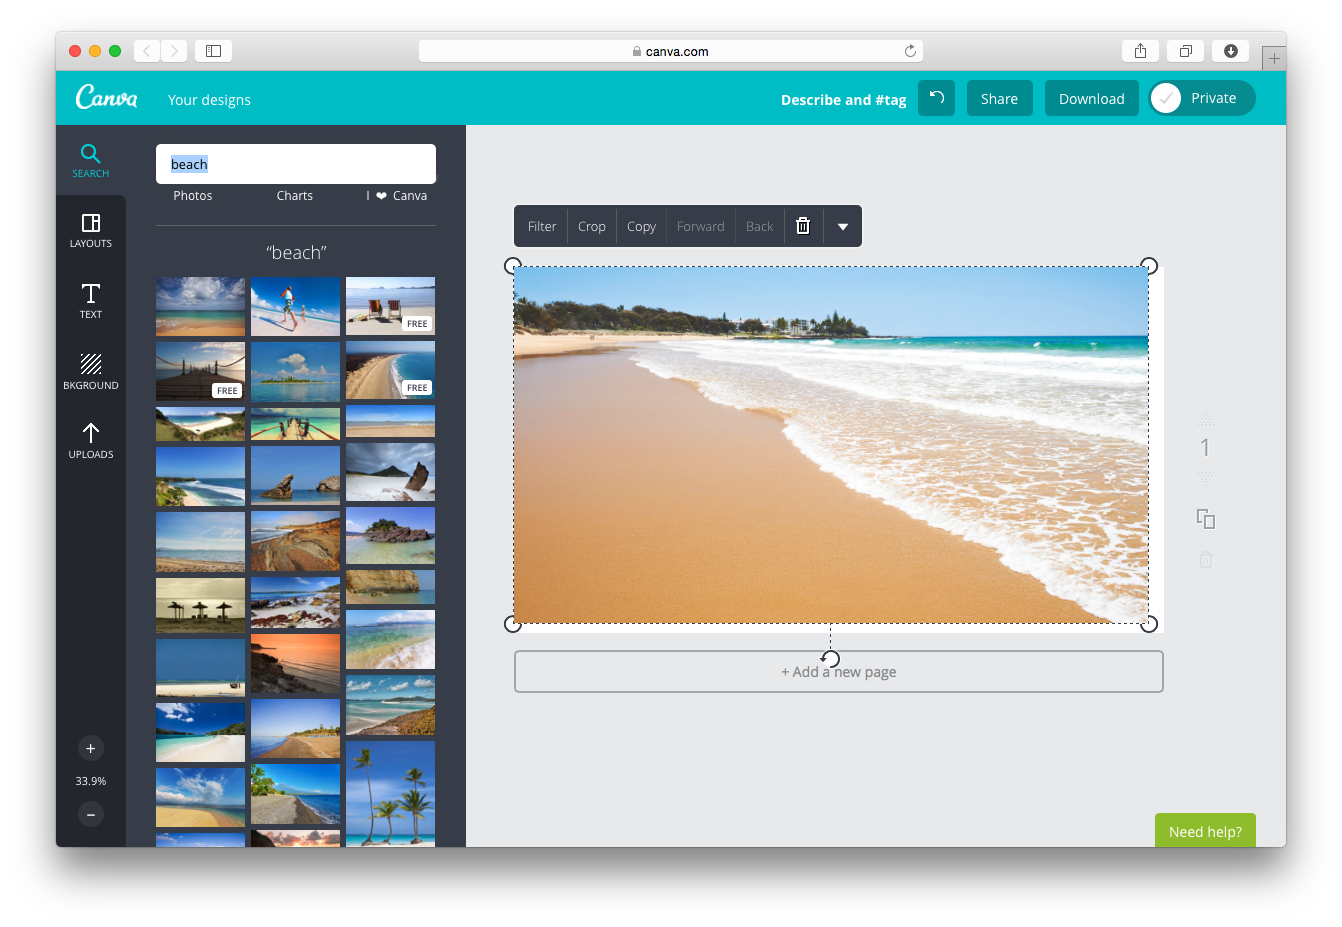 Getting started with Canva